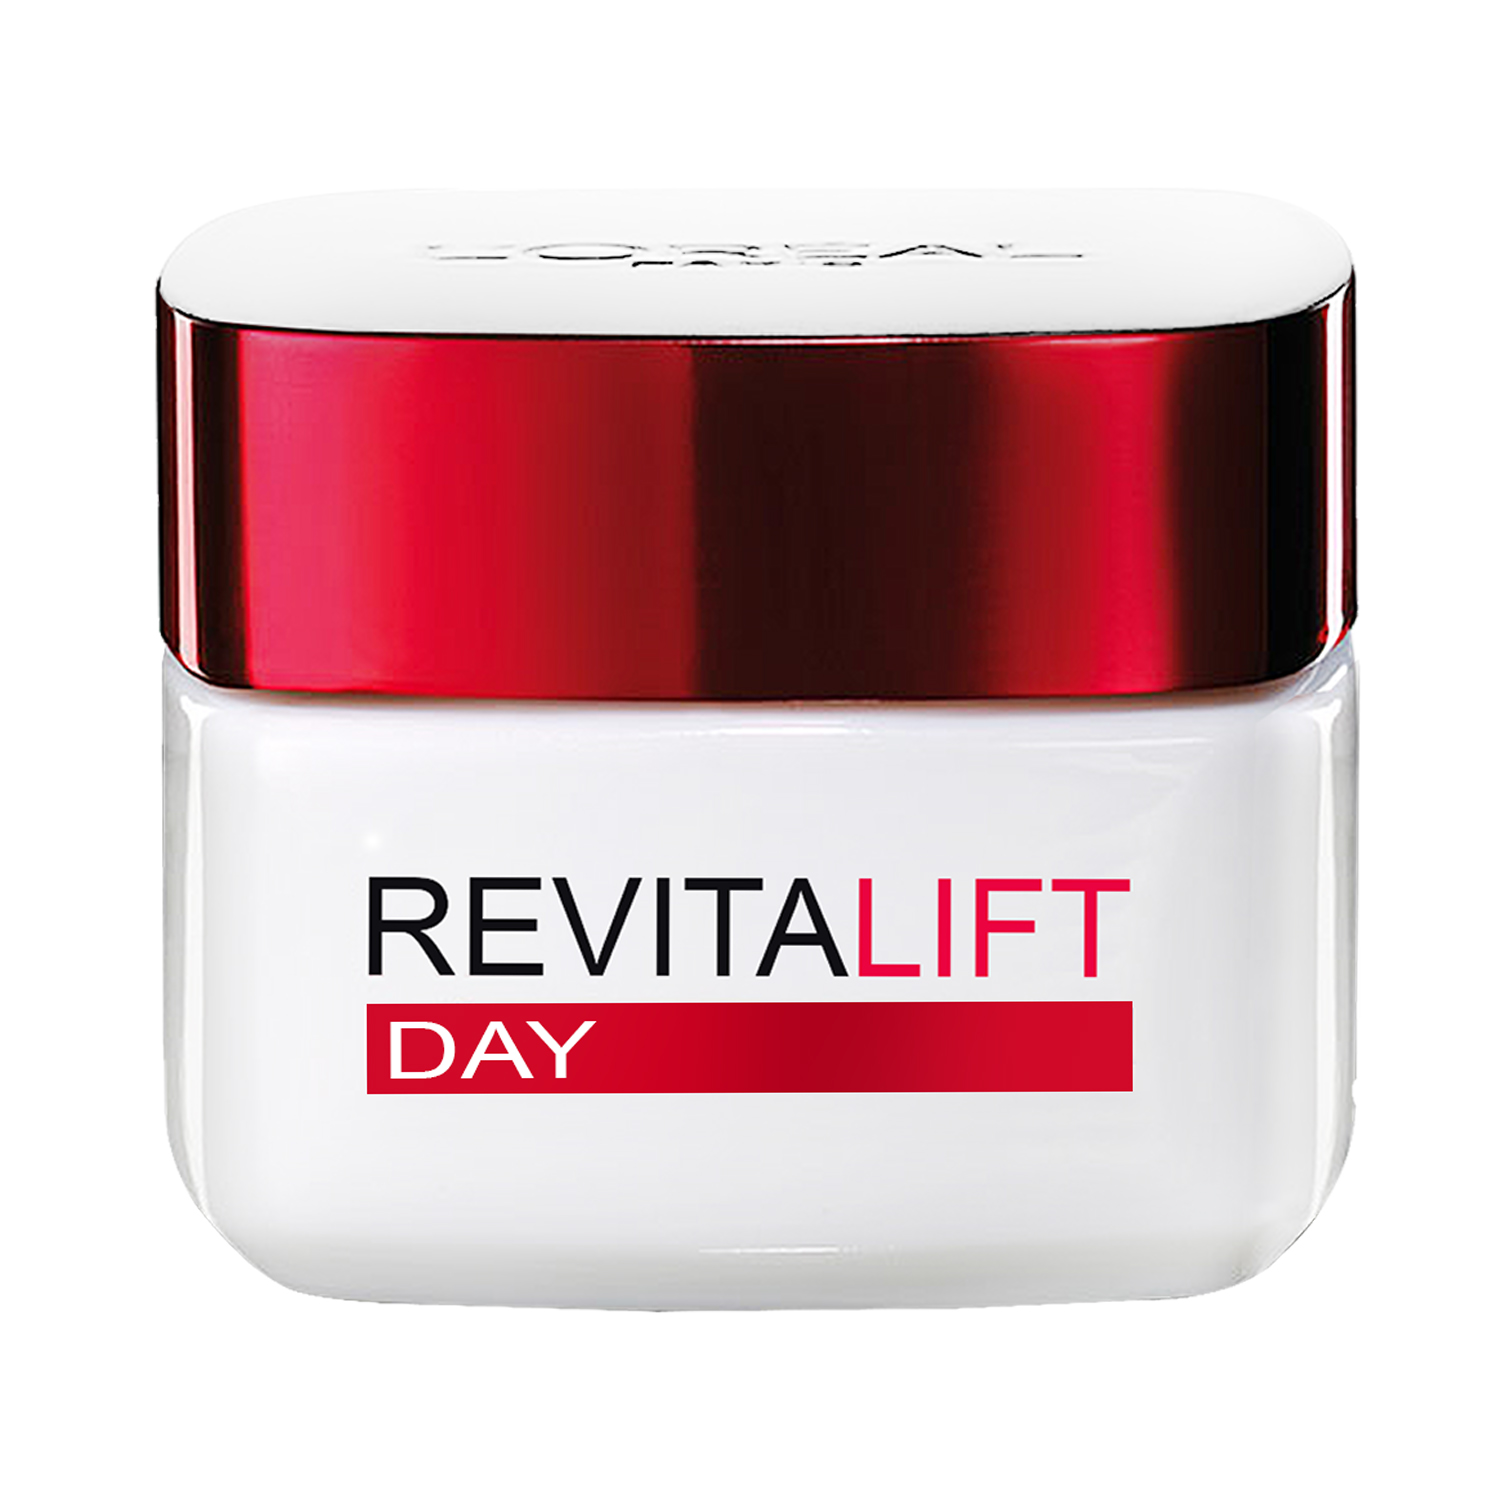 L'Oreal Revitalift Anti-Wrinkle + Firming Day Cream 50ml - WeeklyDeals4Less